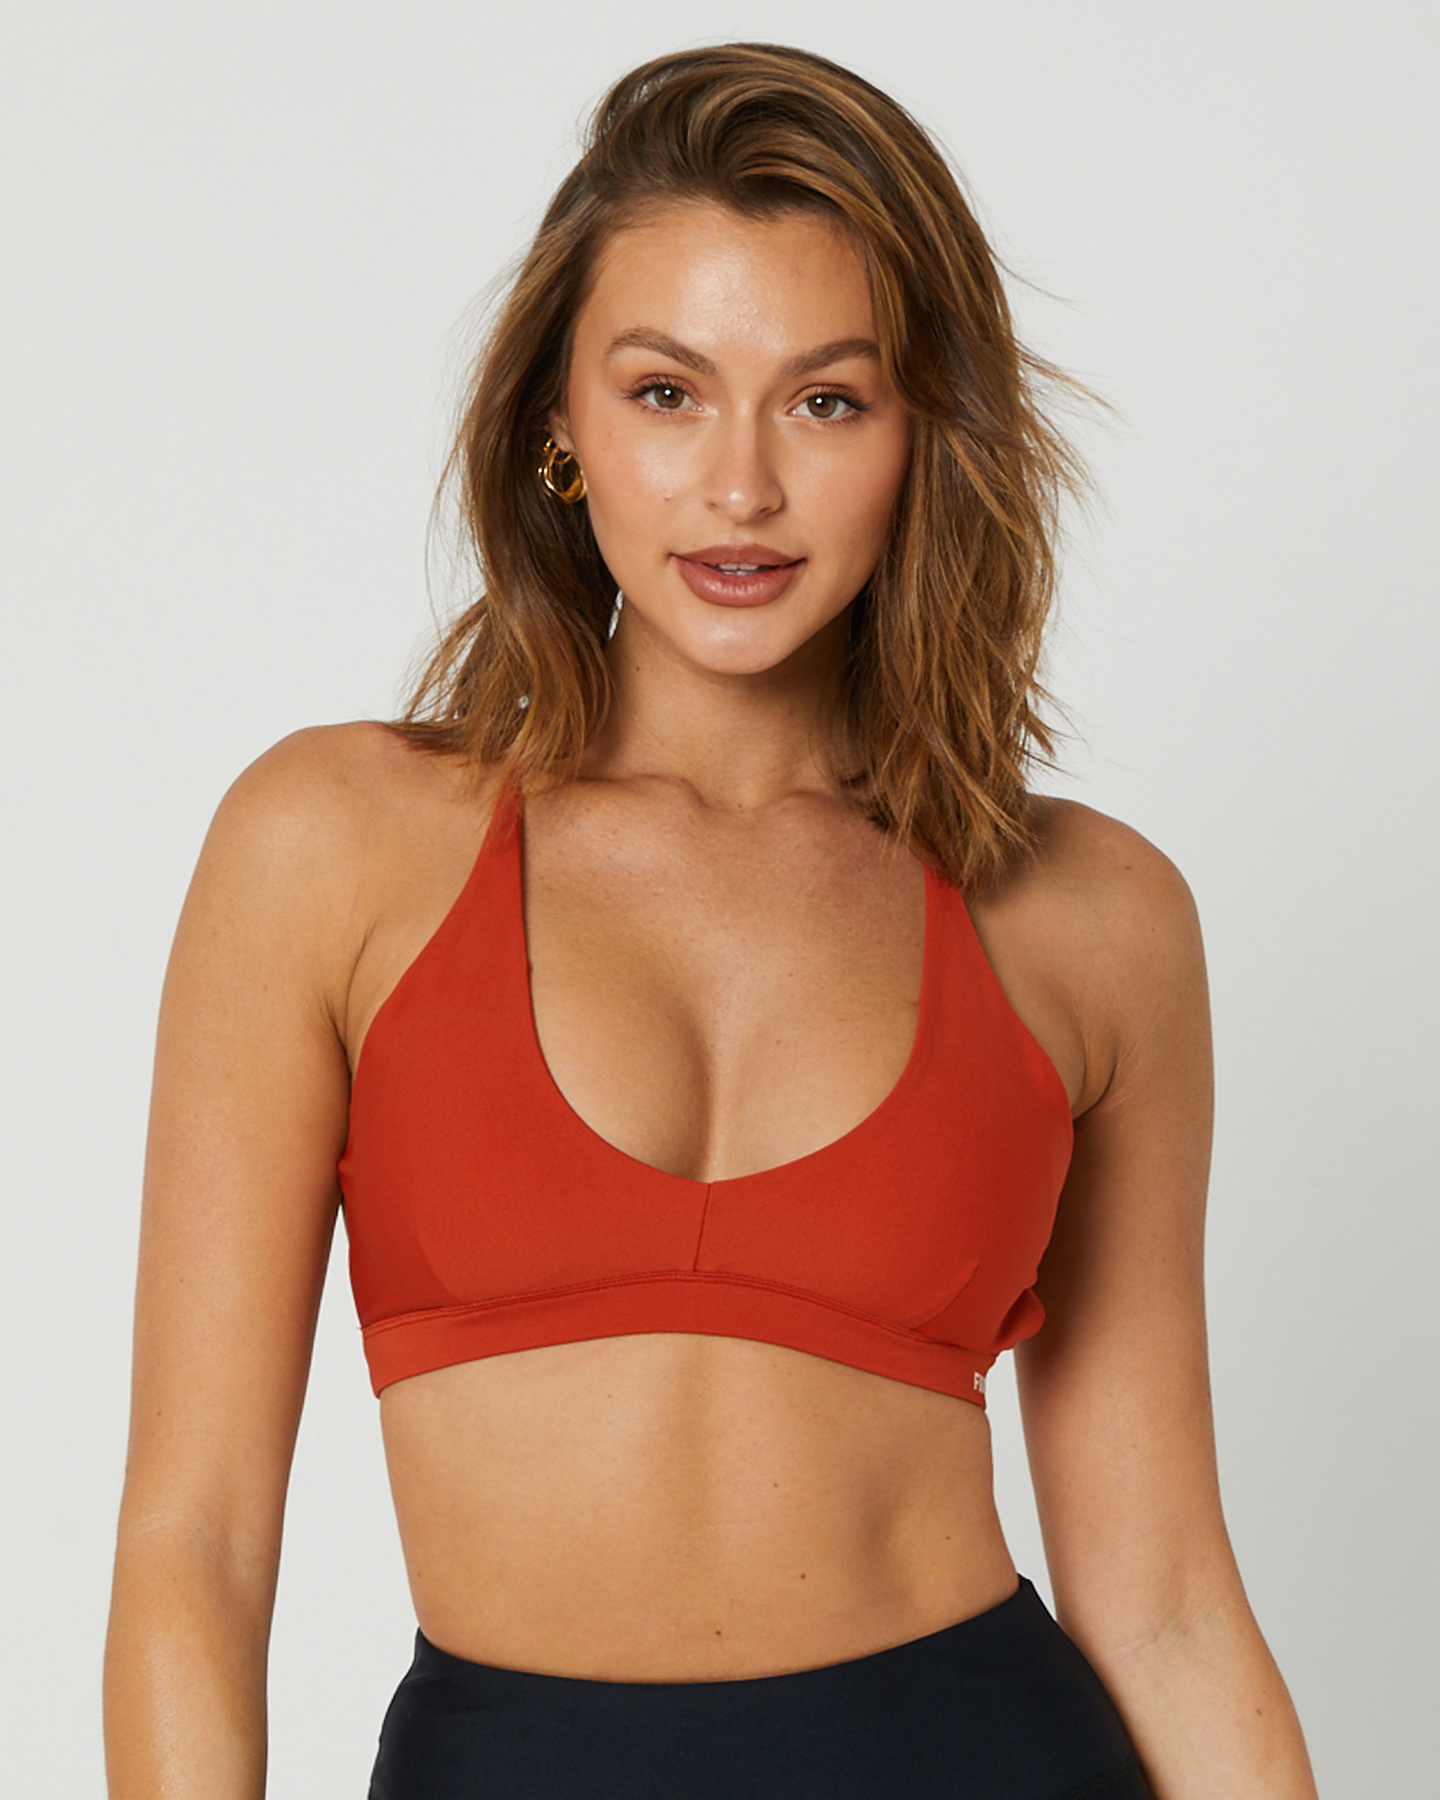 https://www.surfstitch.com/on/demandware.static/-/Sites-ss-master-catalog/default/dw865e4800/images/FB201414S-4/SIENNA-WOMENS-ACTIVEWEAR-FIRST-BASE-SPORTS-BRAS-FB201414S-4_1.JPG